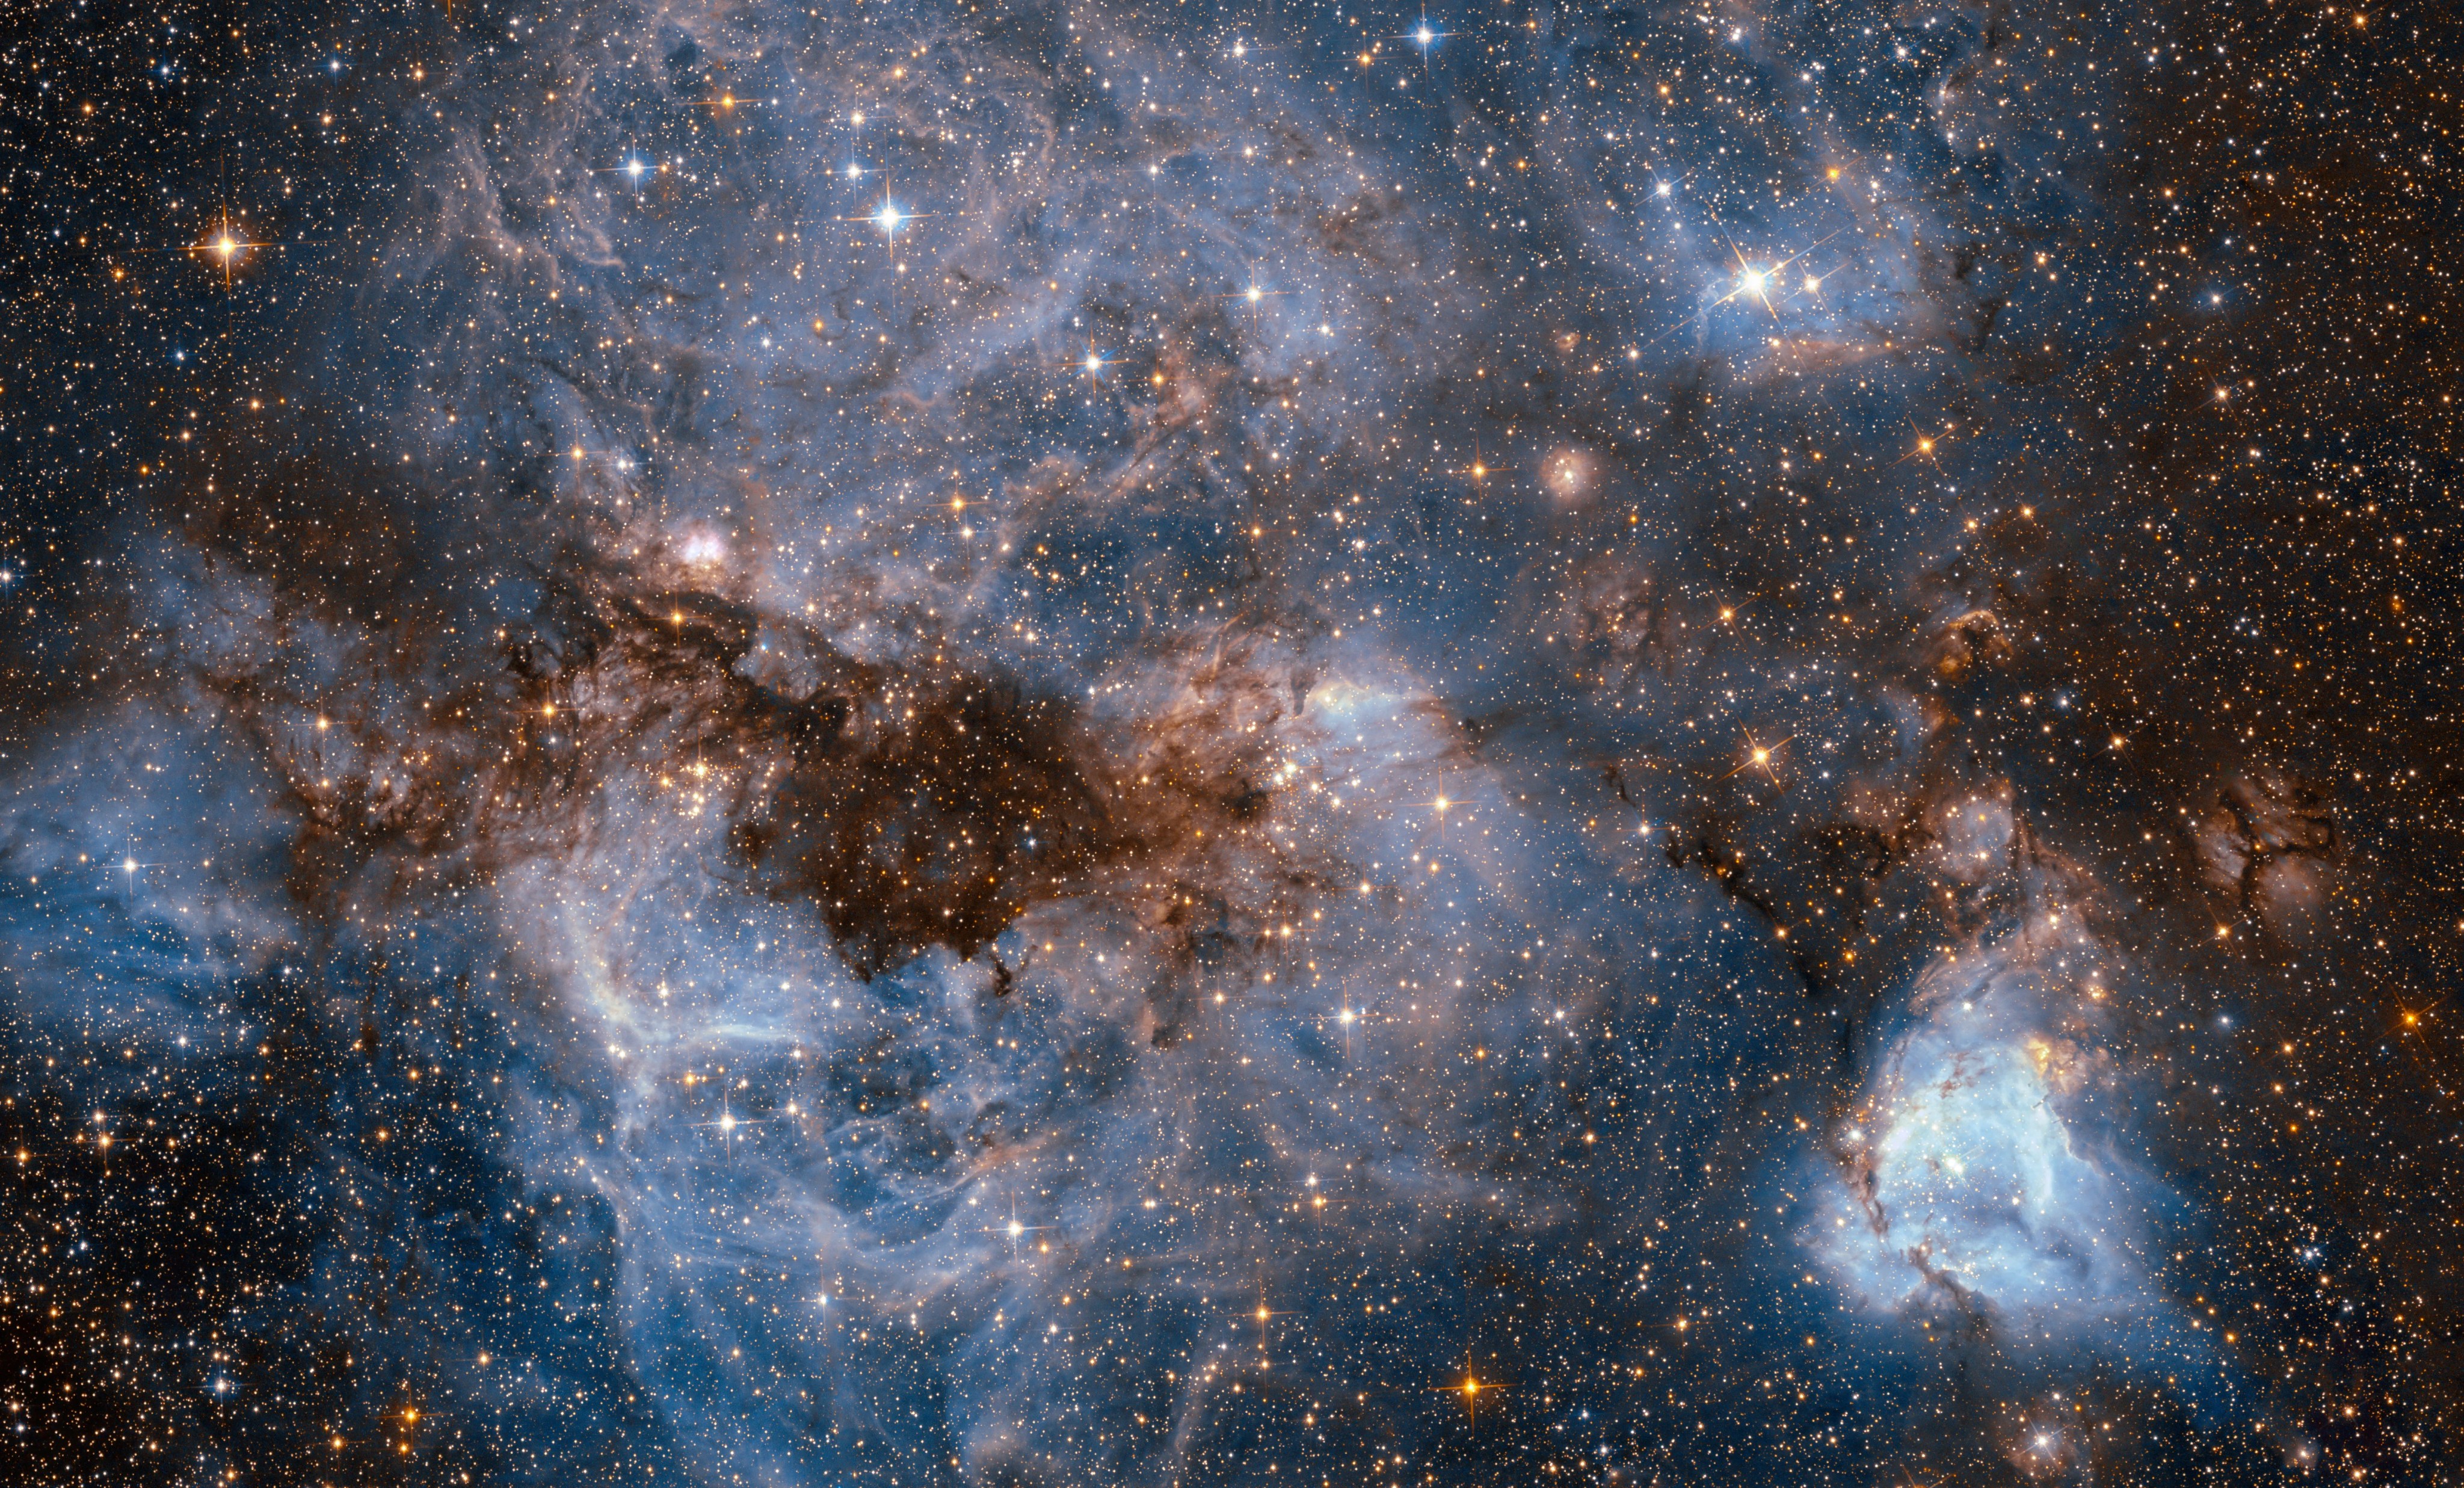 This shot from the nasa/esa hubble space telescope shows a maelstrom of glowing gas and dark dust within one of the milky way’s satellite galaxies, the large magellanic cloud (lmc).